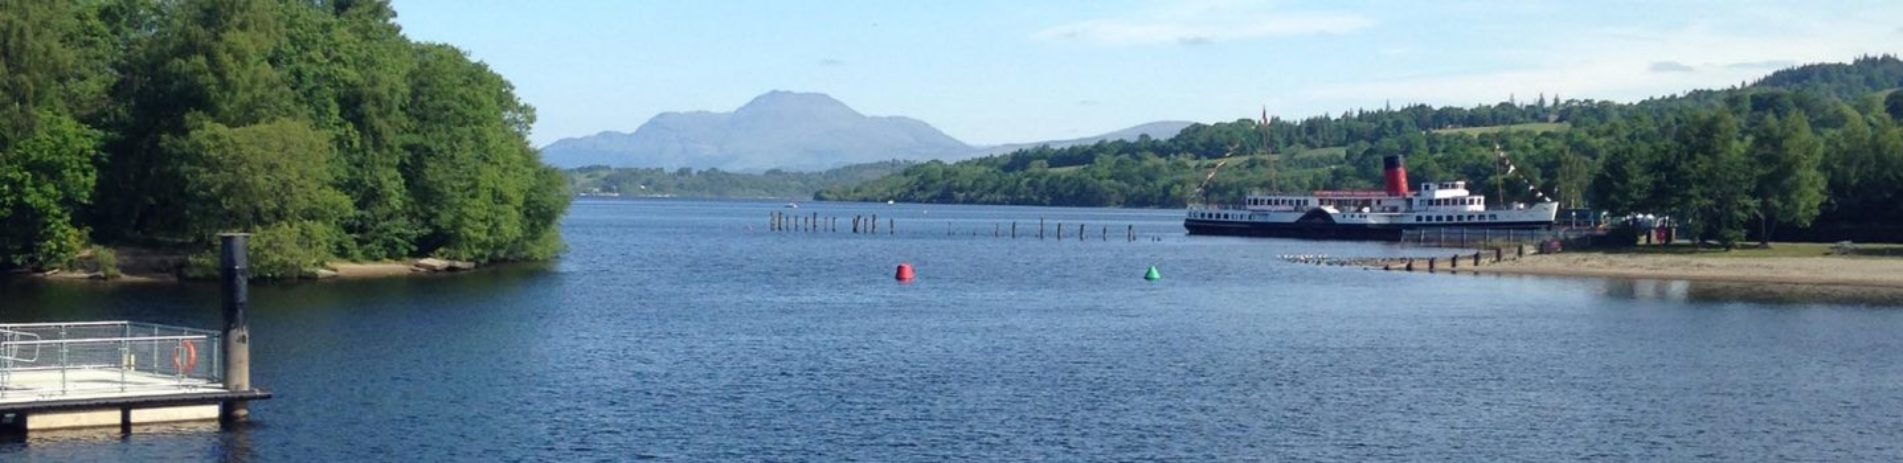 view-of-loch-lomond-wooded-shores-maid-of-the-loch-steamship-and-ben-lomond-in-the-distance